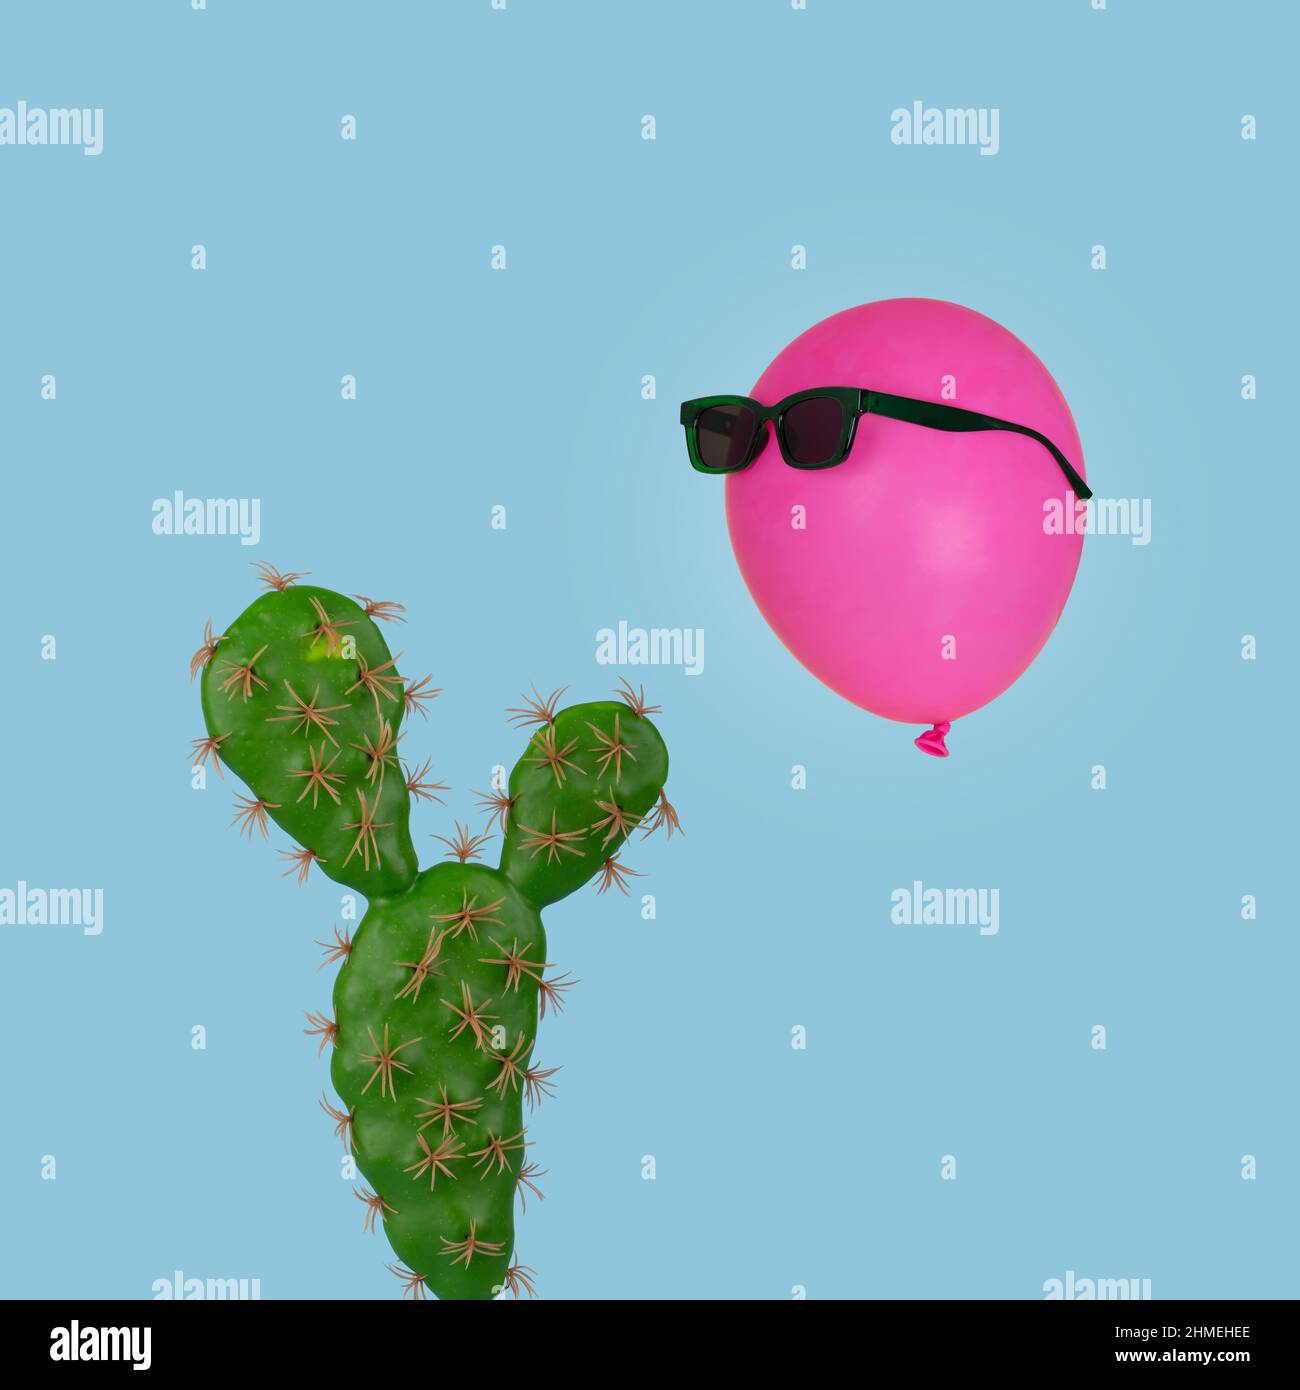 Cactus plant with above it floating a pink balloon in sunglasses isolated on a pastel blue background. Creative minimal concept.  Use for card, poster Stock Photo